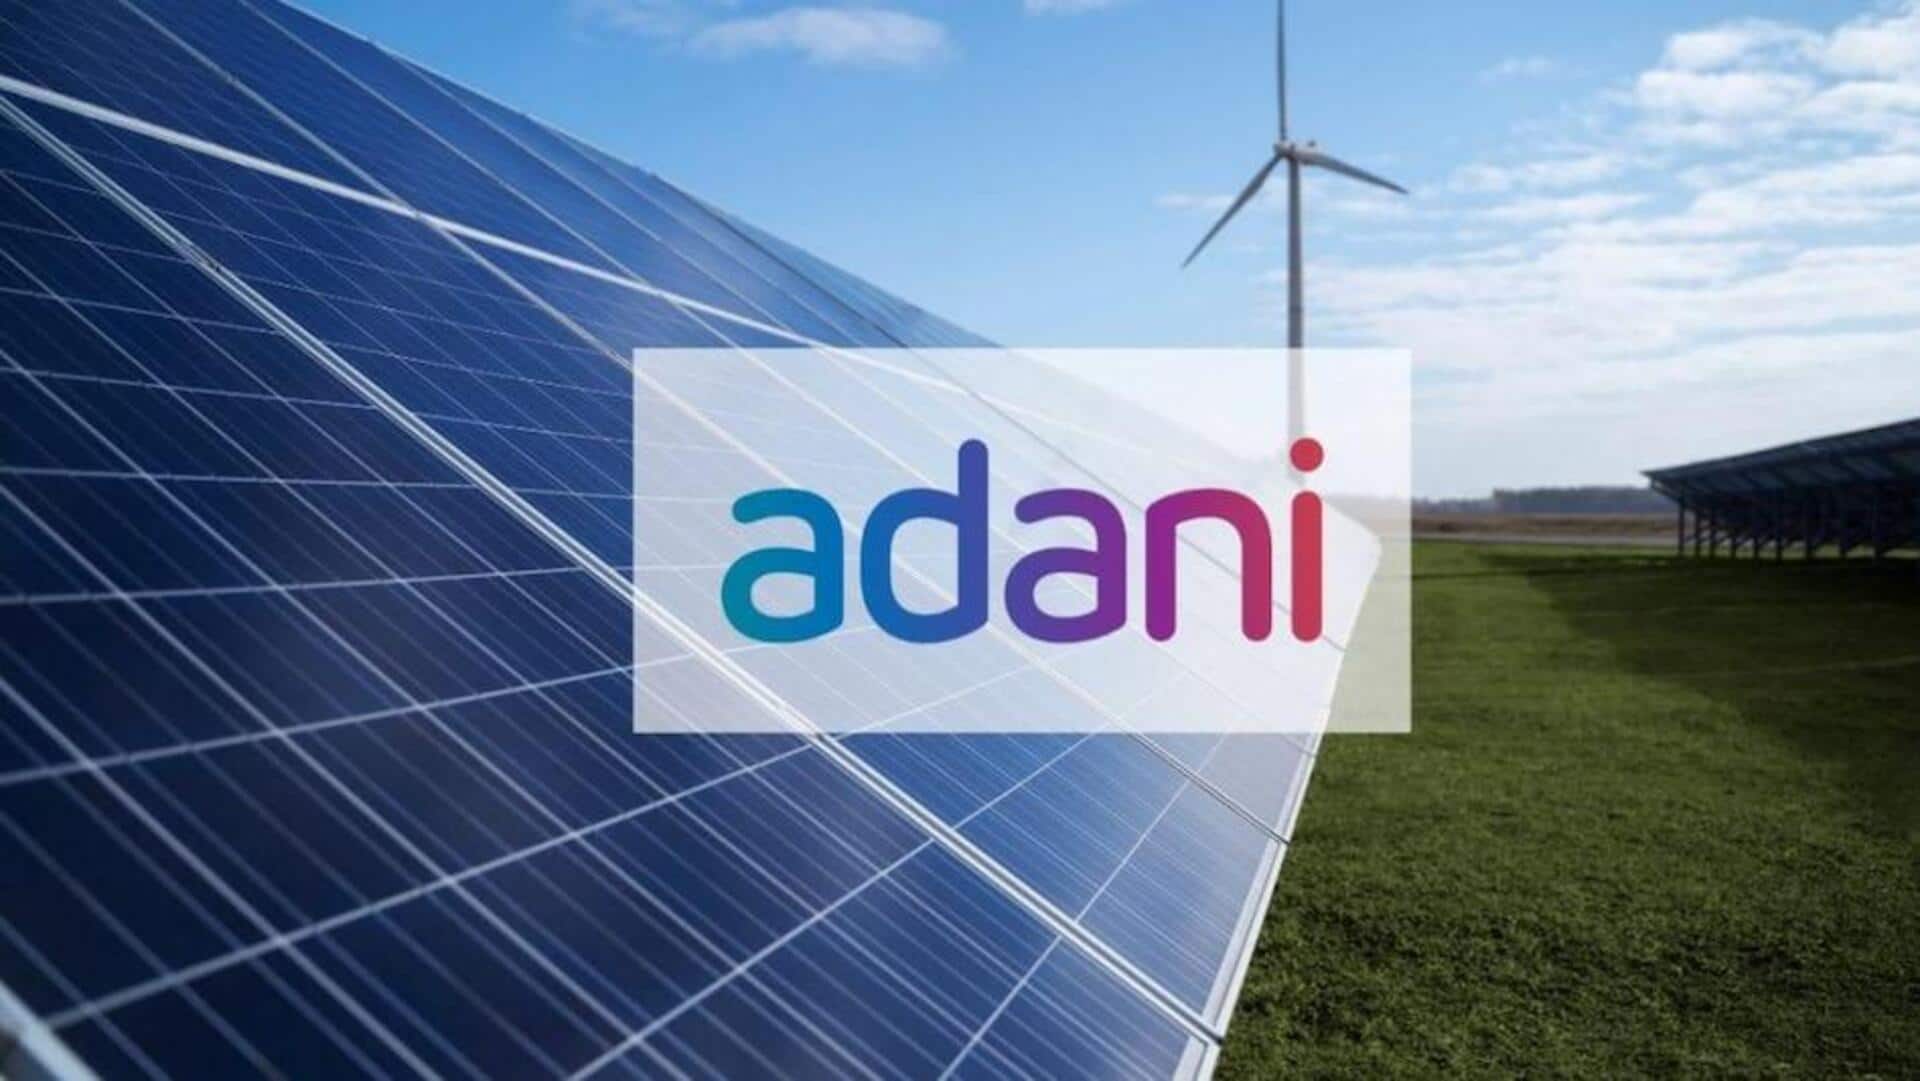 Adani Green Energy to receive Rs. 9,350cr investment from promoters